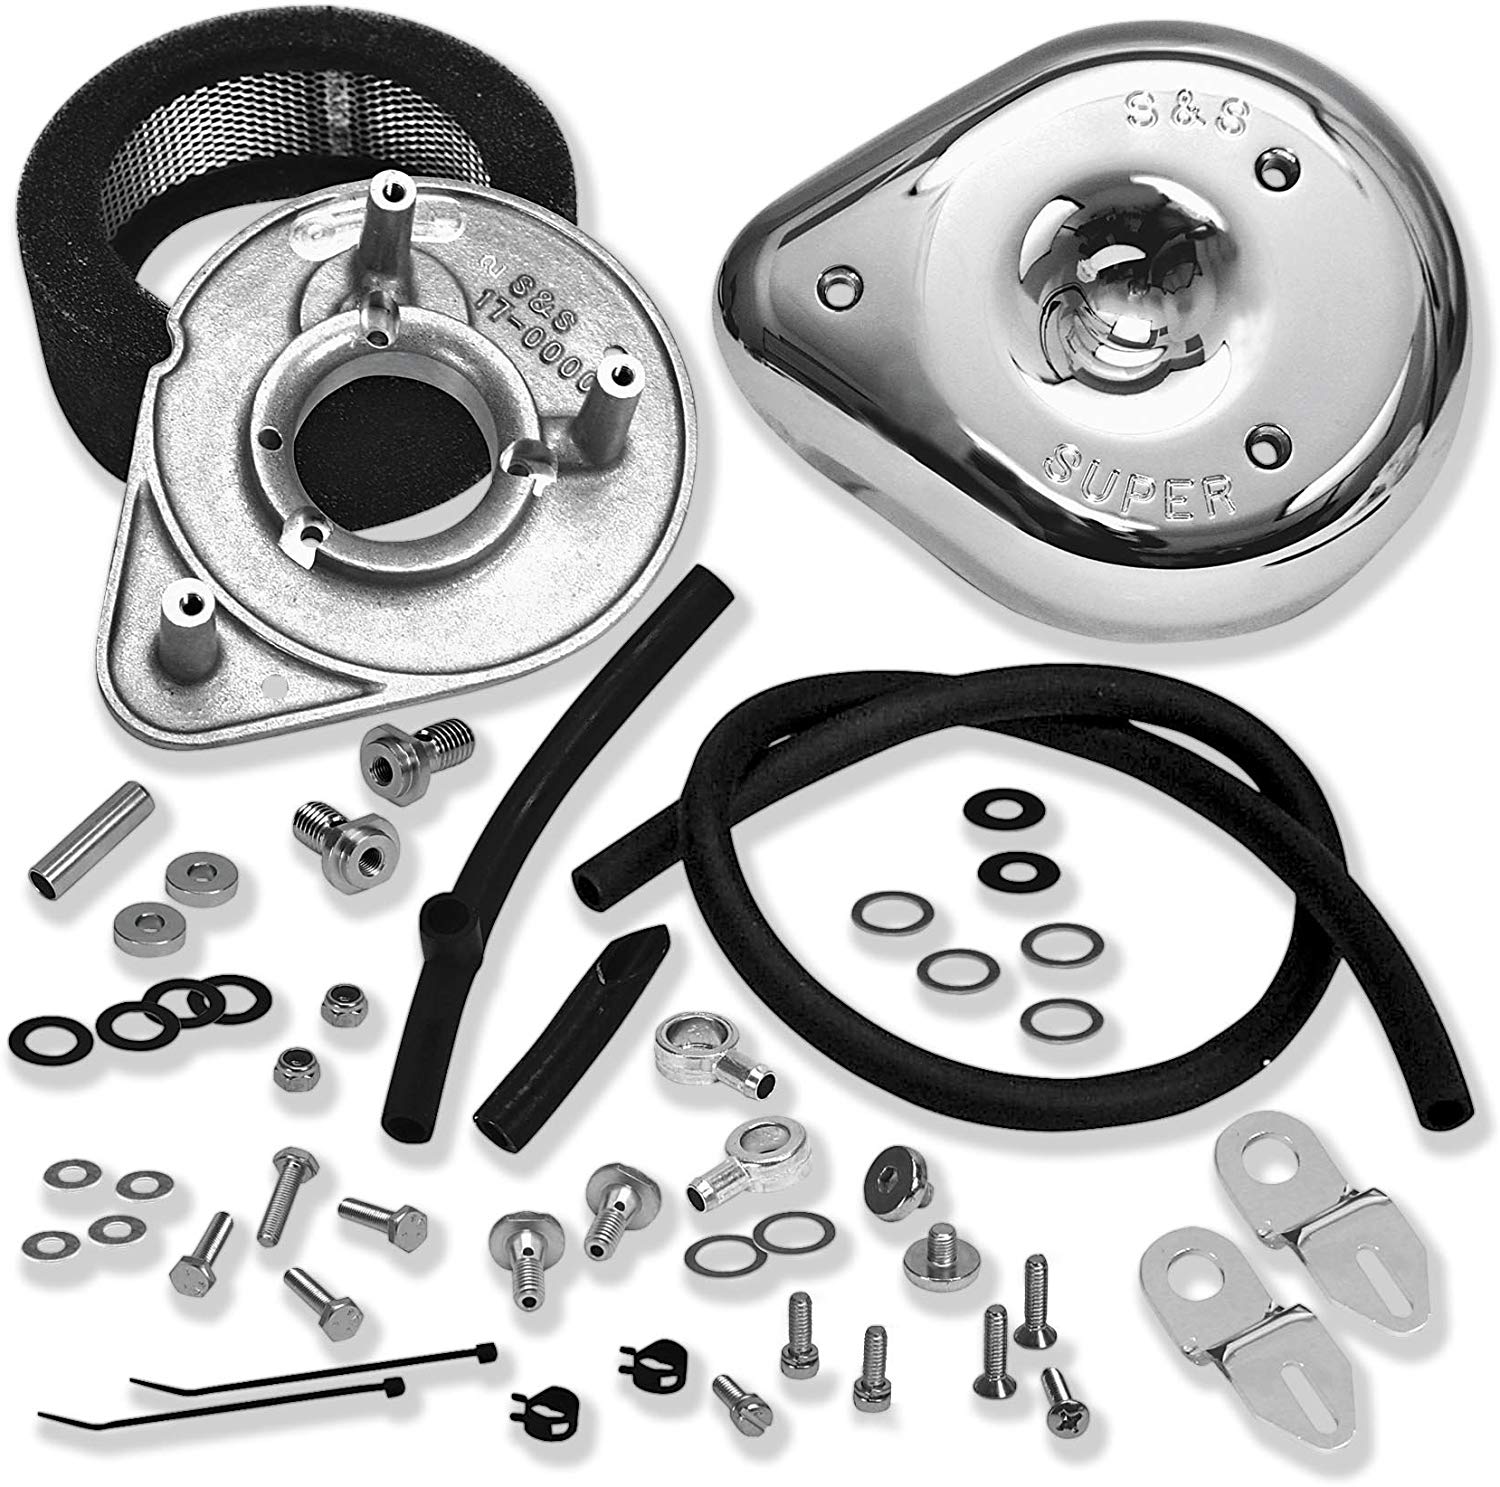 S&S Cycle Air Cleaner Kits for Sporster w/Stock Fuel System